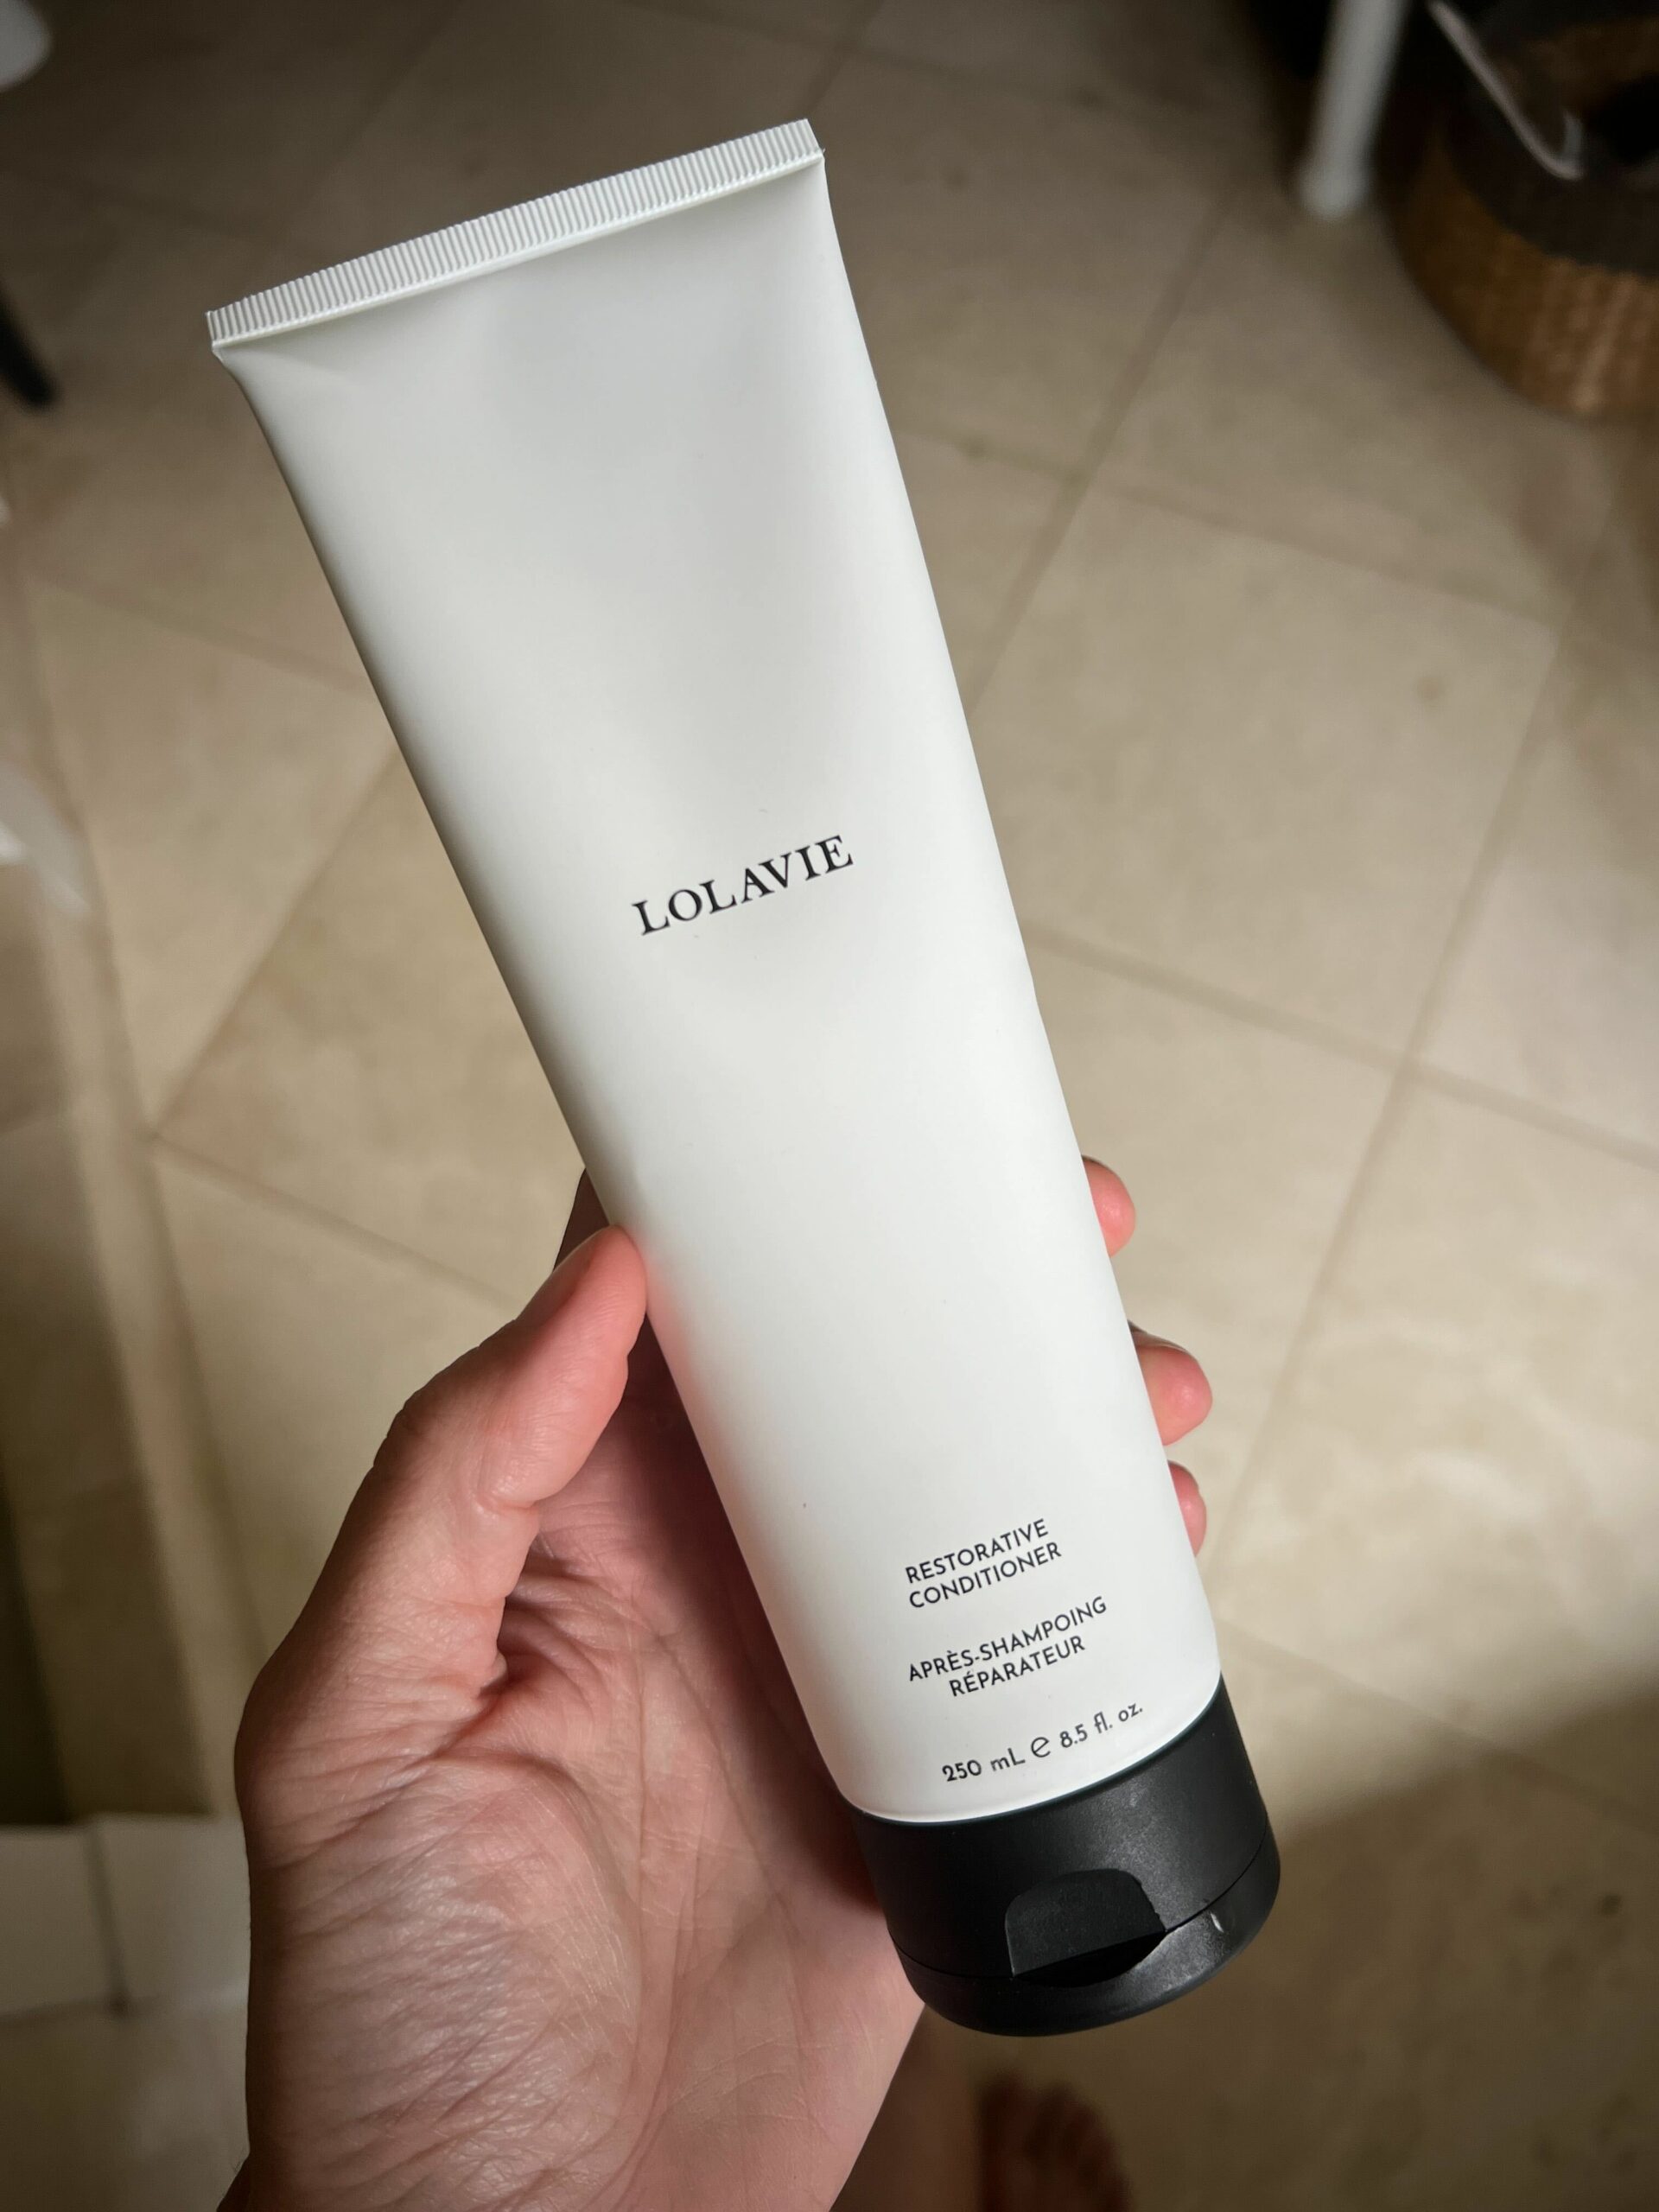 A bottle of LolaVie's Restorative Conditioner in a woman's hand.